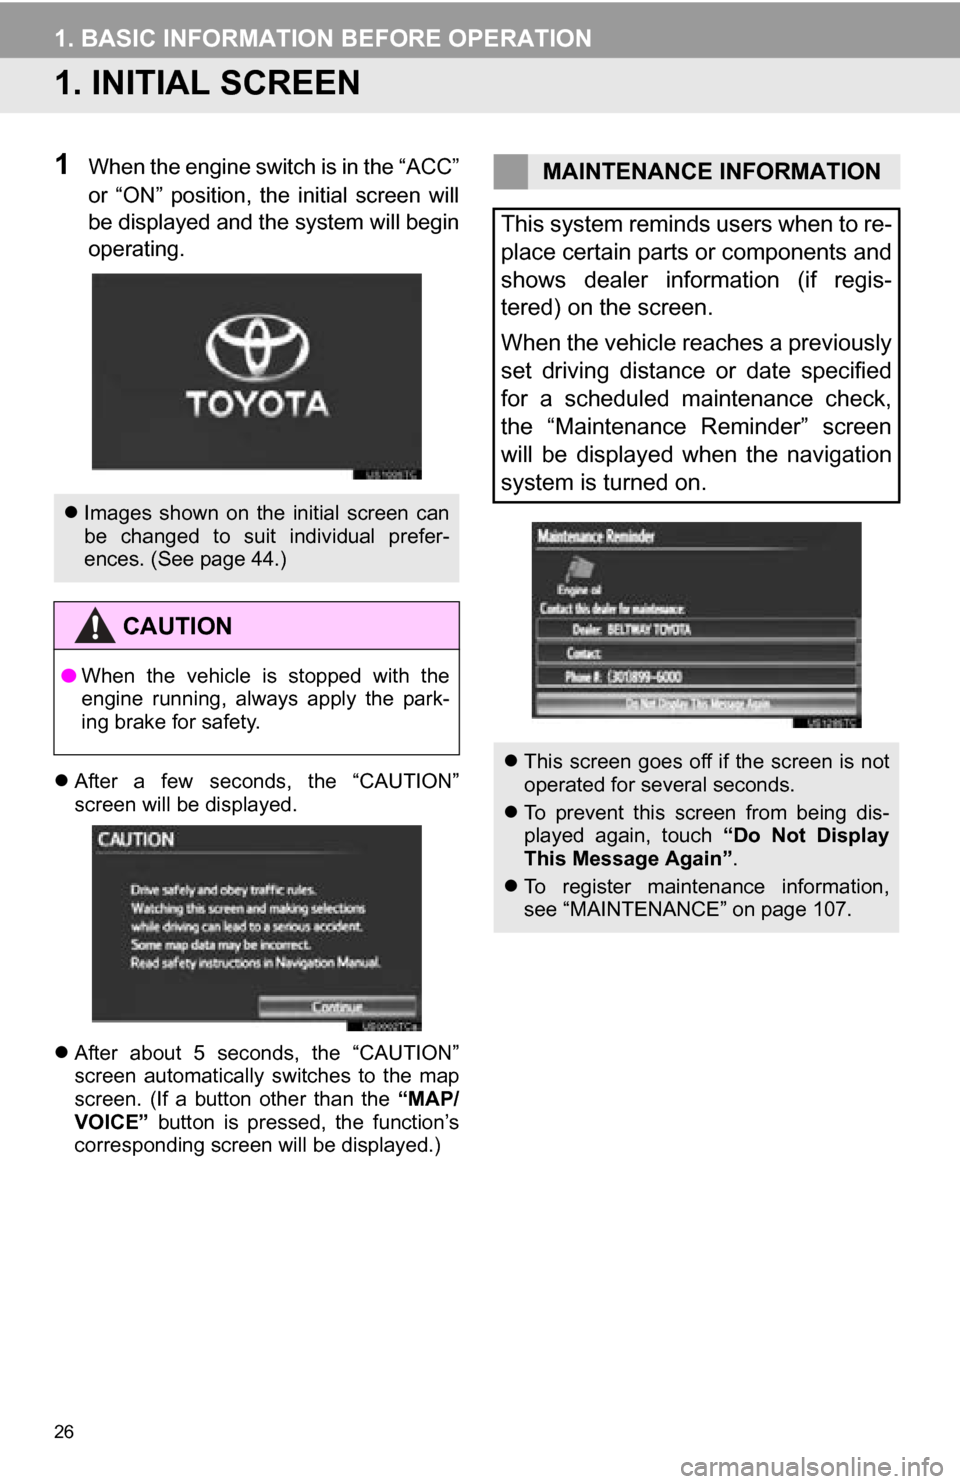 TOYOTA SEQUOIA 2013 2.G Navigation Manual 26
1. BASIC INFORMATION BEFORE OPERATION
1. INITIAL SCREEN
1When the engine switch is in the “ACC”
or  “ON”  position,  the  initial  screen  will
be displayed and the system will begin
operat